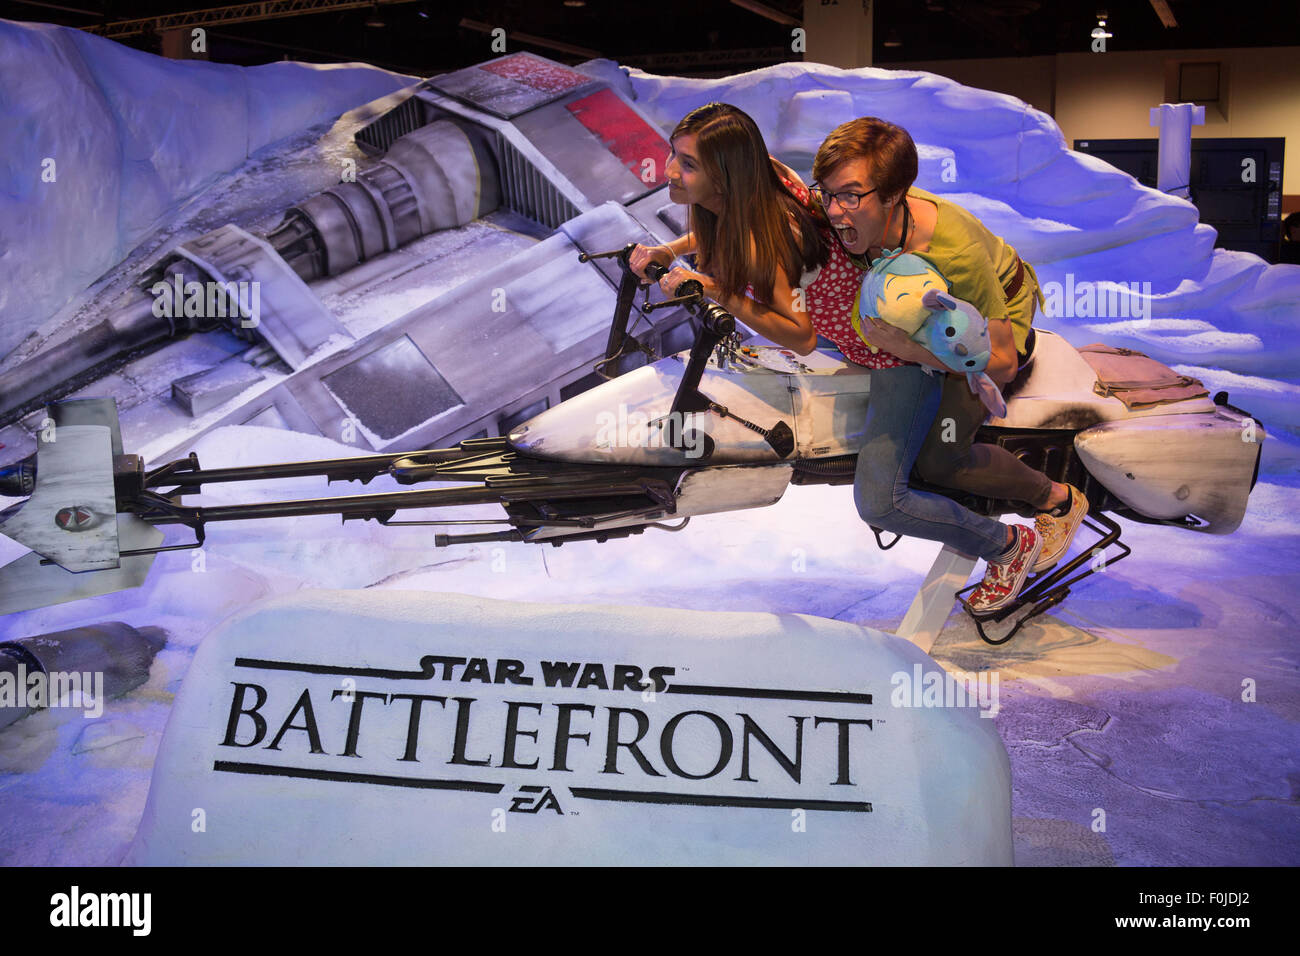 Anaheim, California, USA. 15th Aug, 2015. Brandon Wolfe and Lori Galarreta pose for a photo opportunity from the Star Wars Battlefront video game at the Disney D23 Expo fan event in Anaheim, CA, USA August 16, 2015. Credit:  Kayte Deioma/Alamy Live News Stock Photo